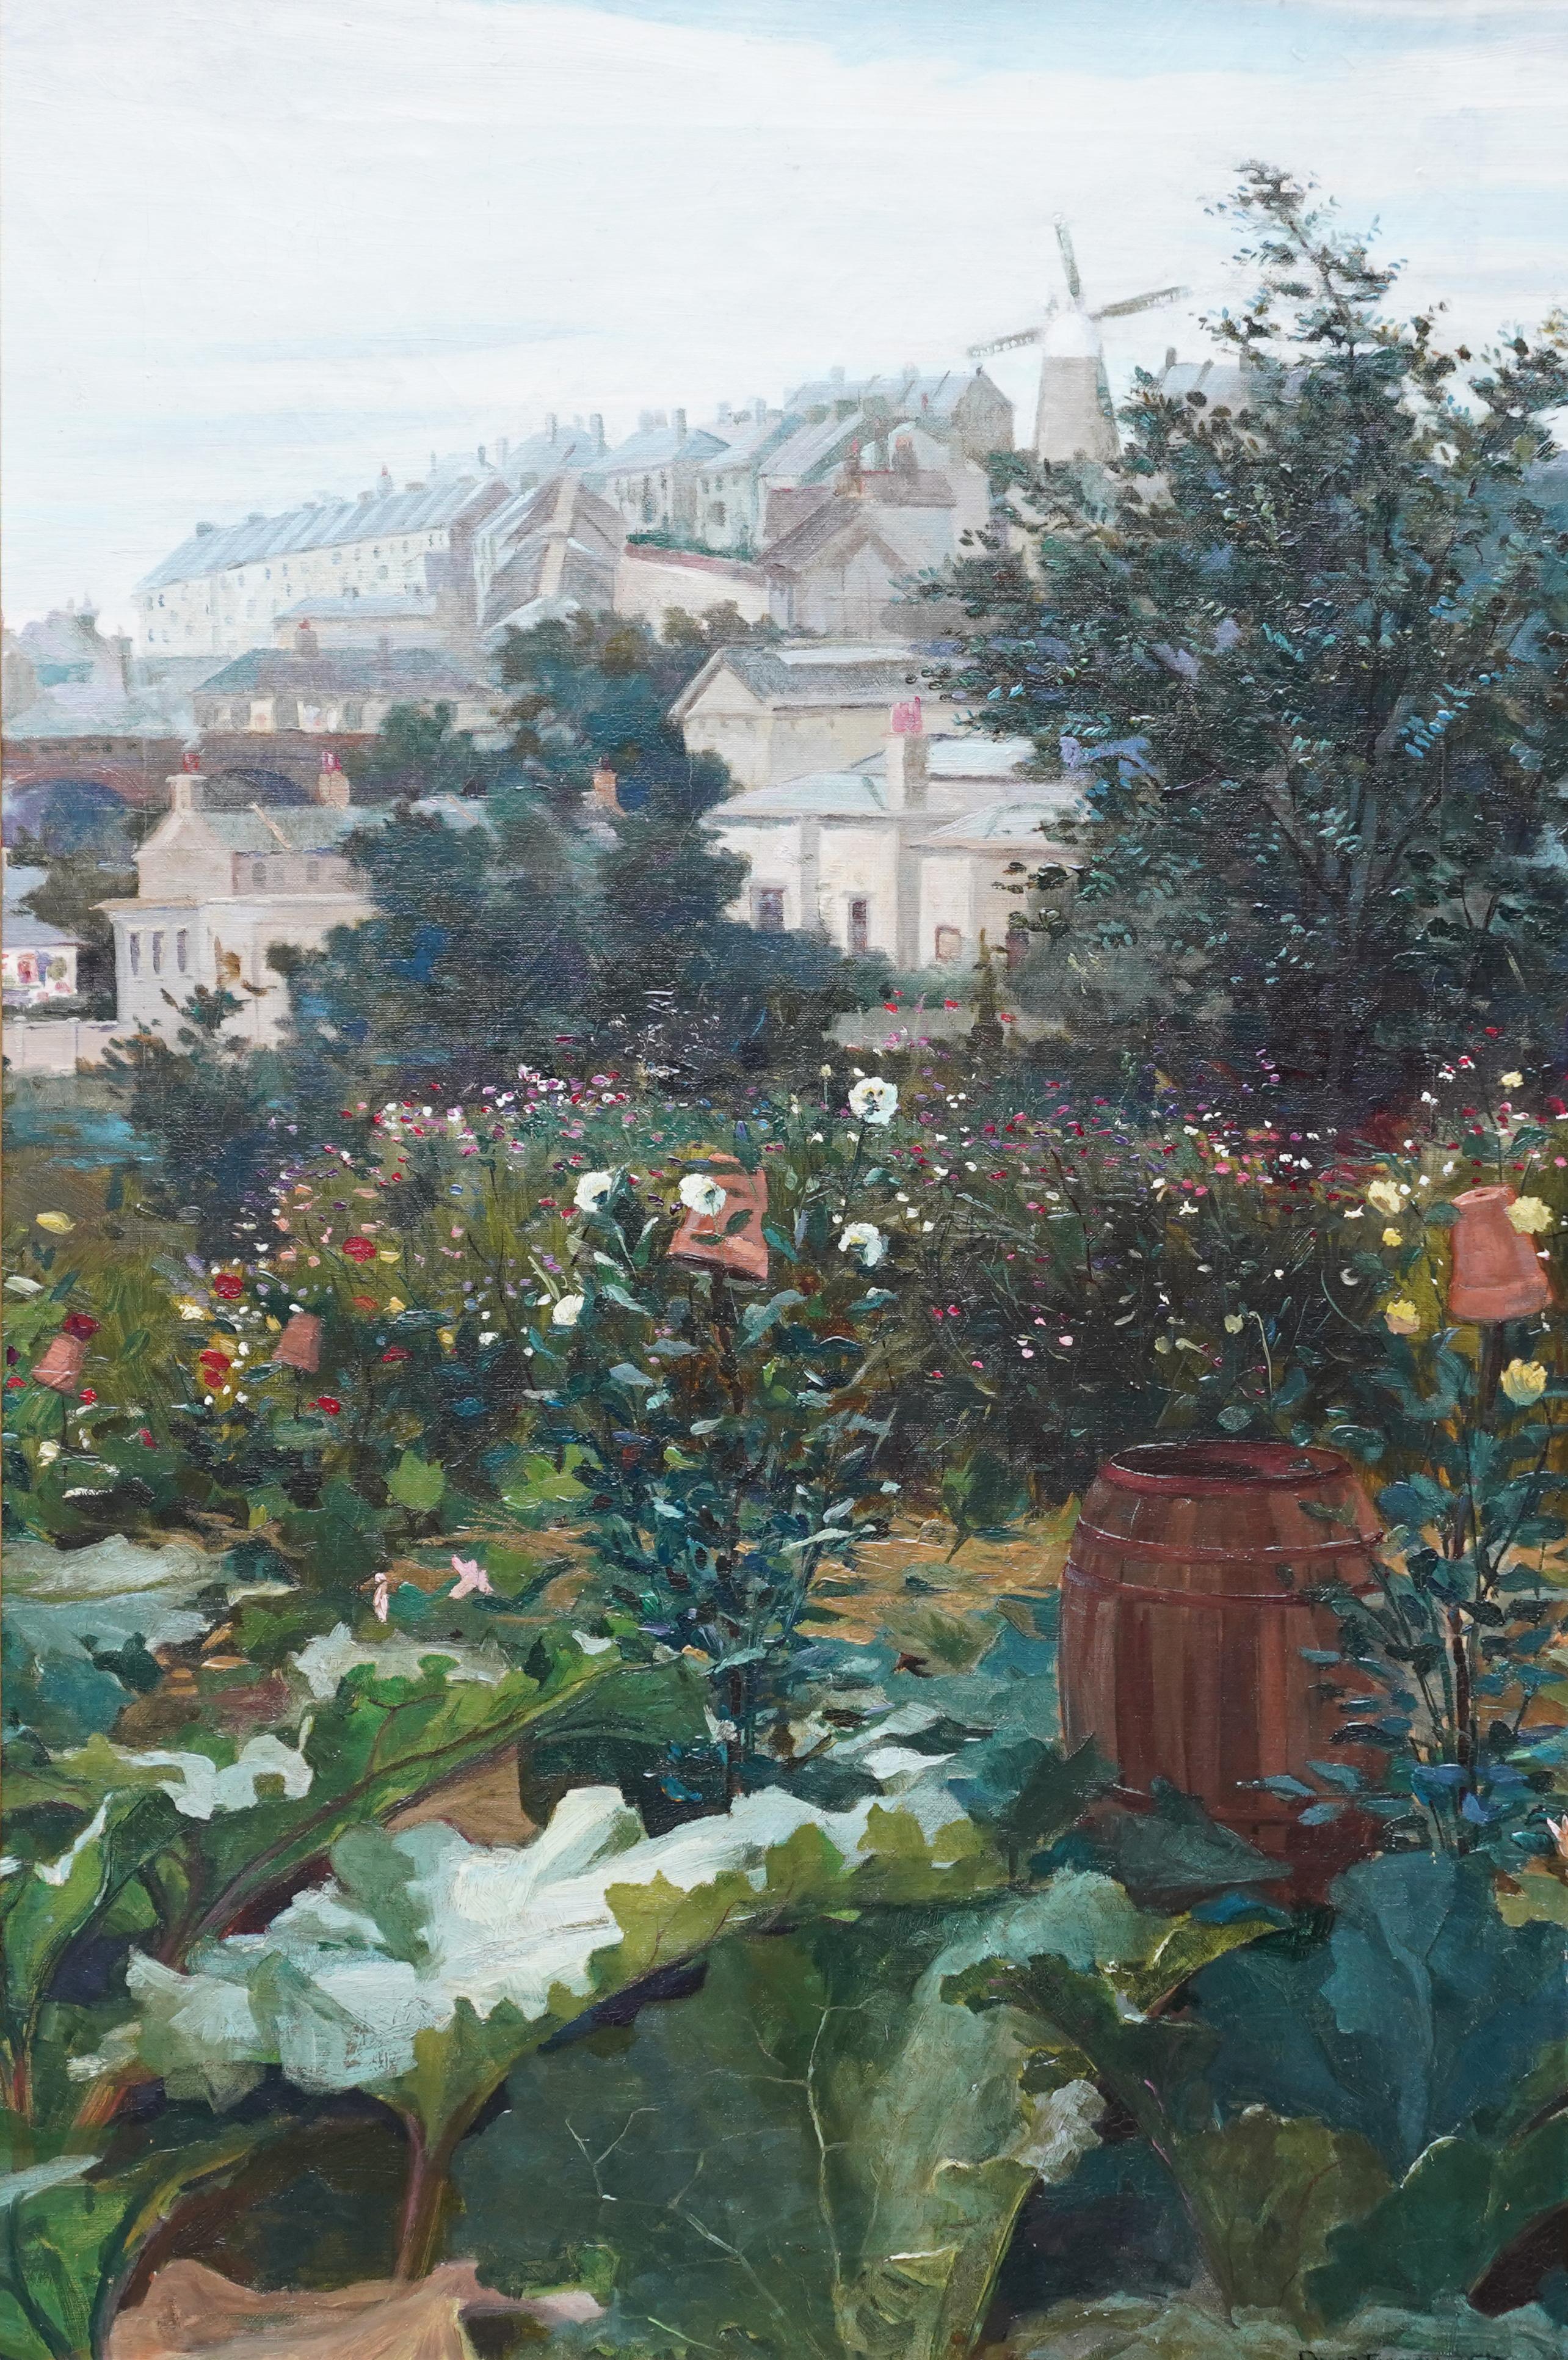 City Garden with Windmill Beyond - Scottish 19th century landscape oil painting - Painting by David Fulton